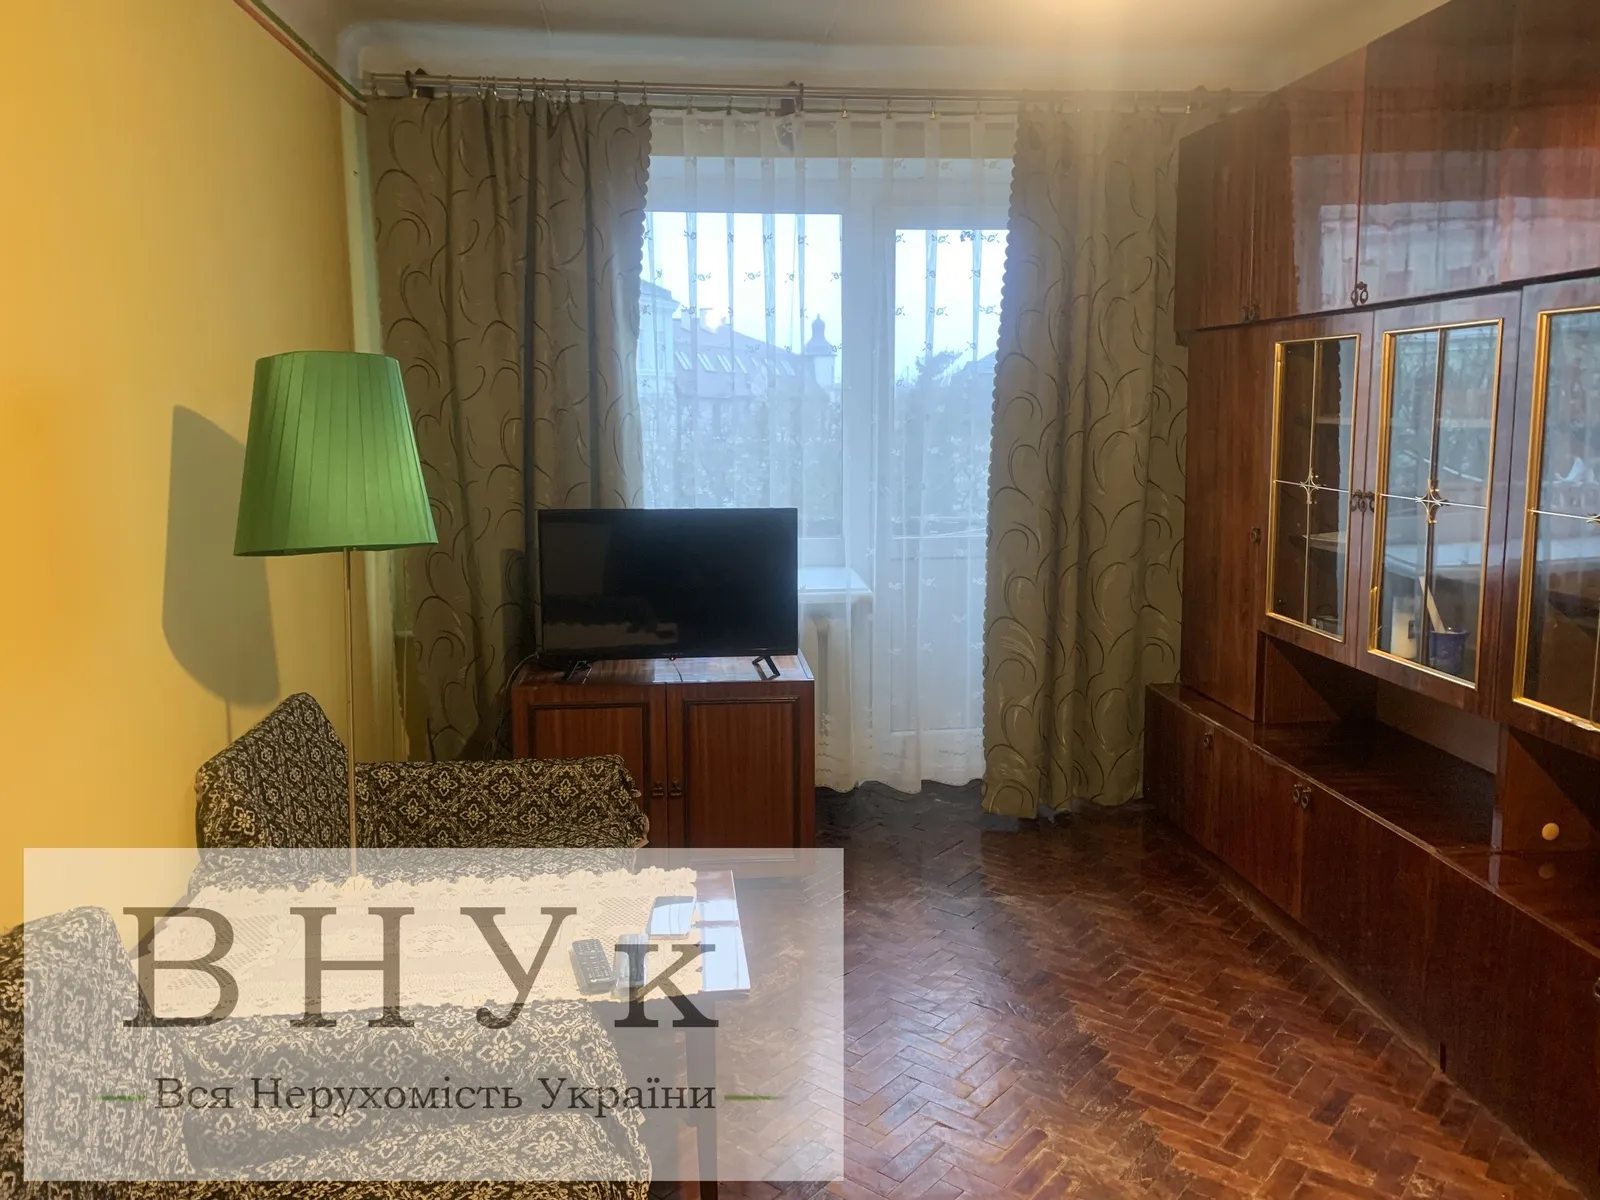 Apartments for sale. 3 rooms, 59 m², 5th floor/5 floors. Kachaly , Ternopil. 